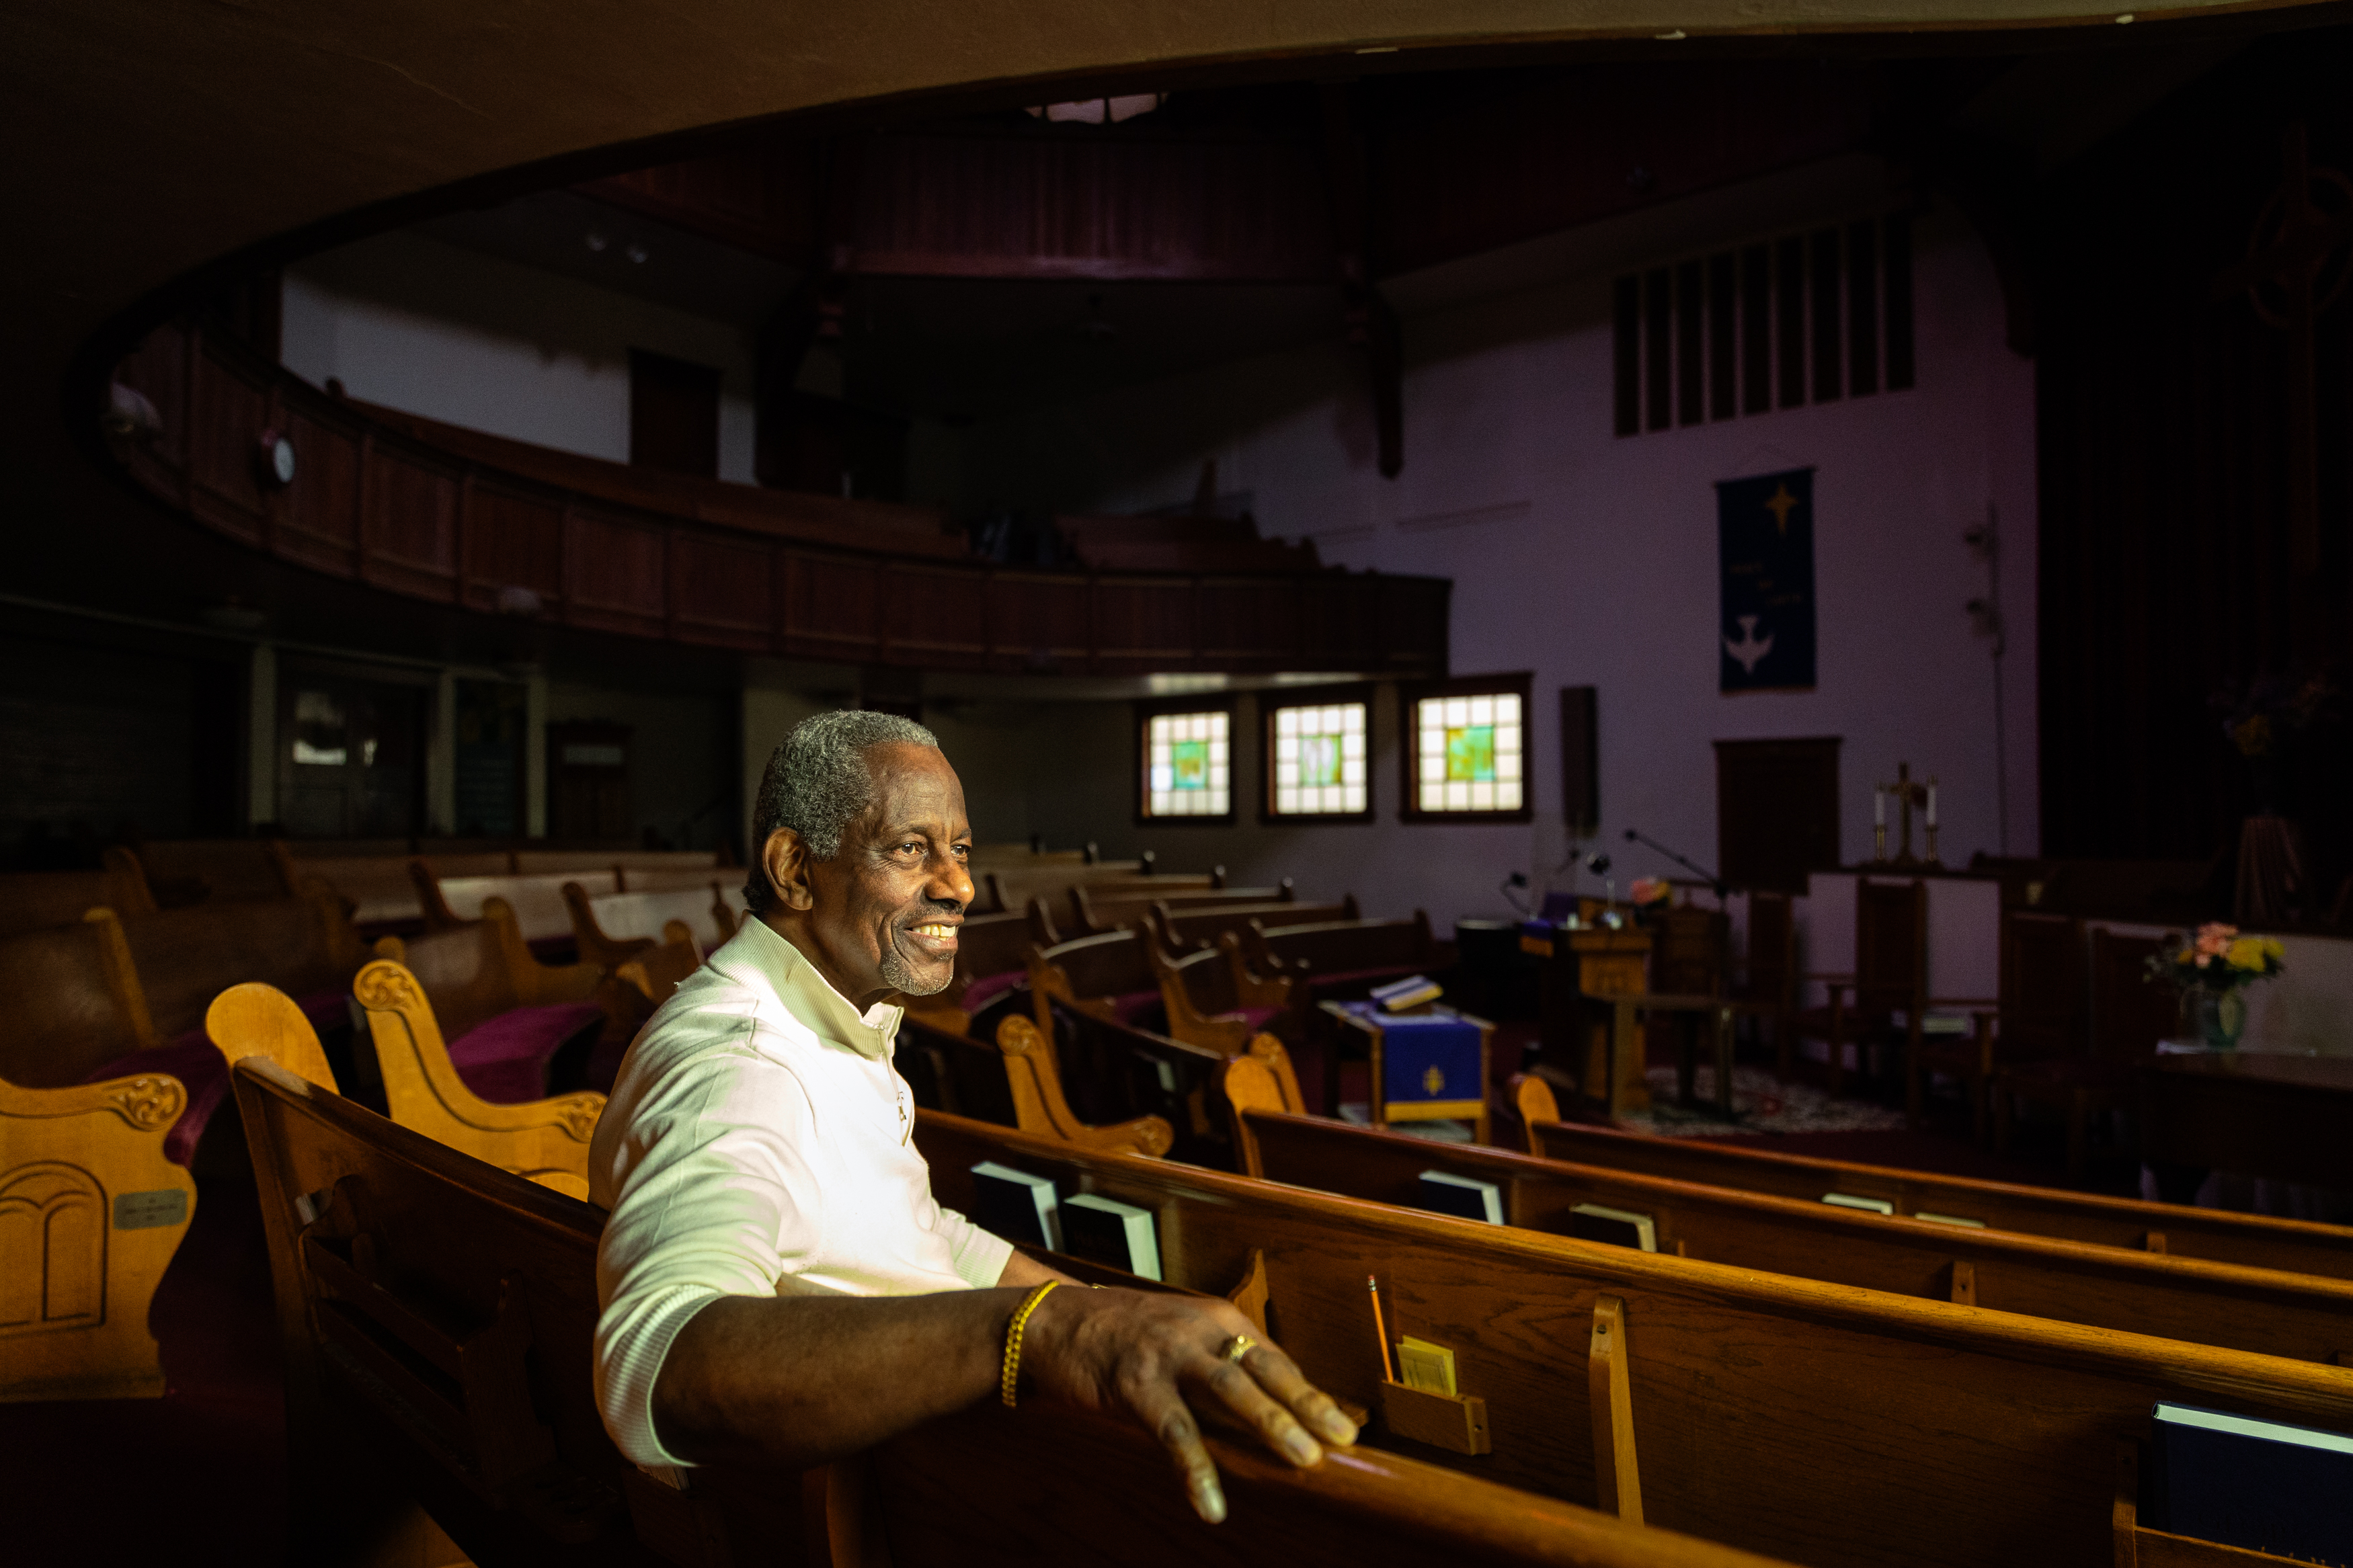 A smiling man sits in a sunlit church, amidst wooden pews and stained-glass windows.